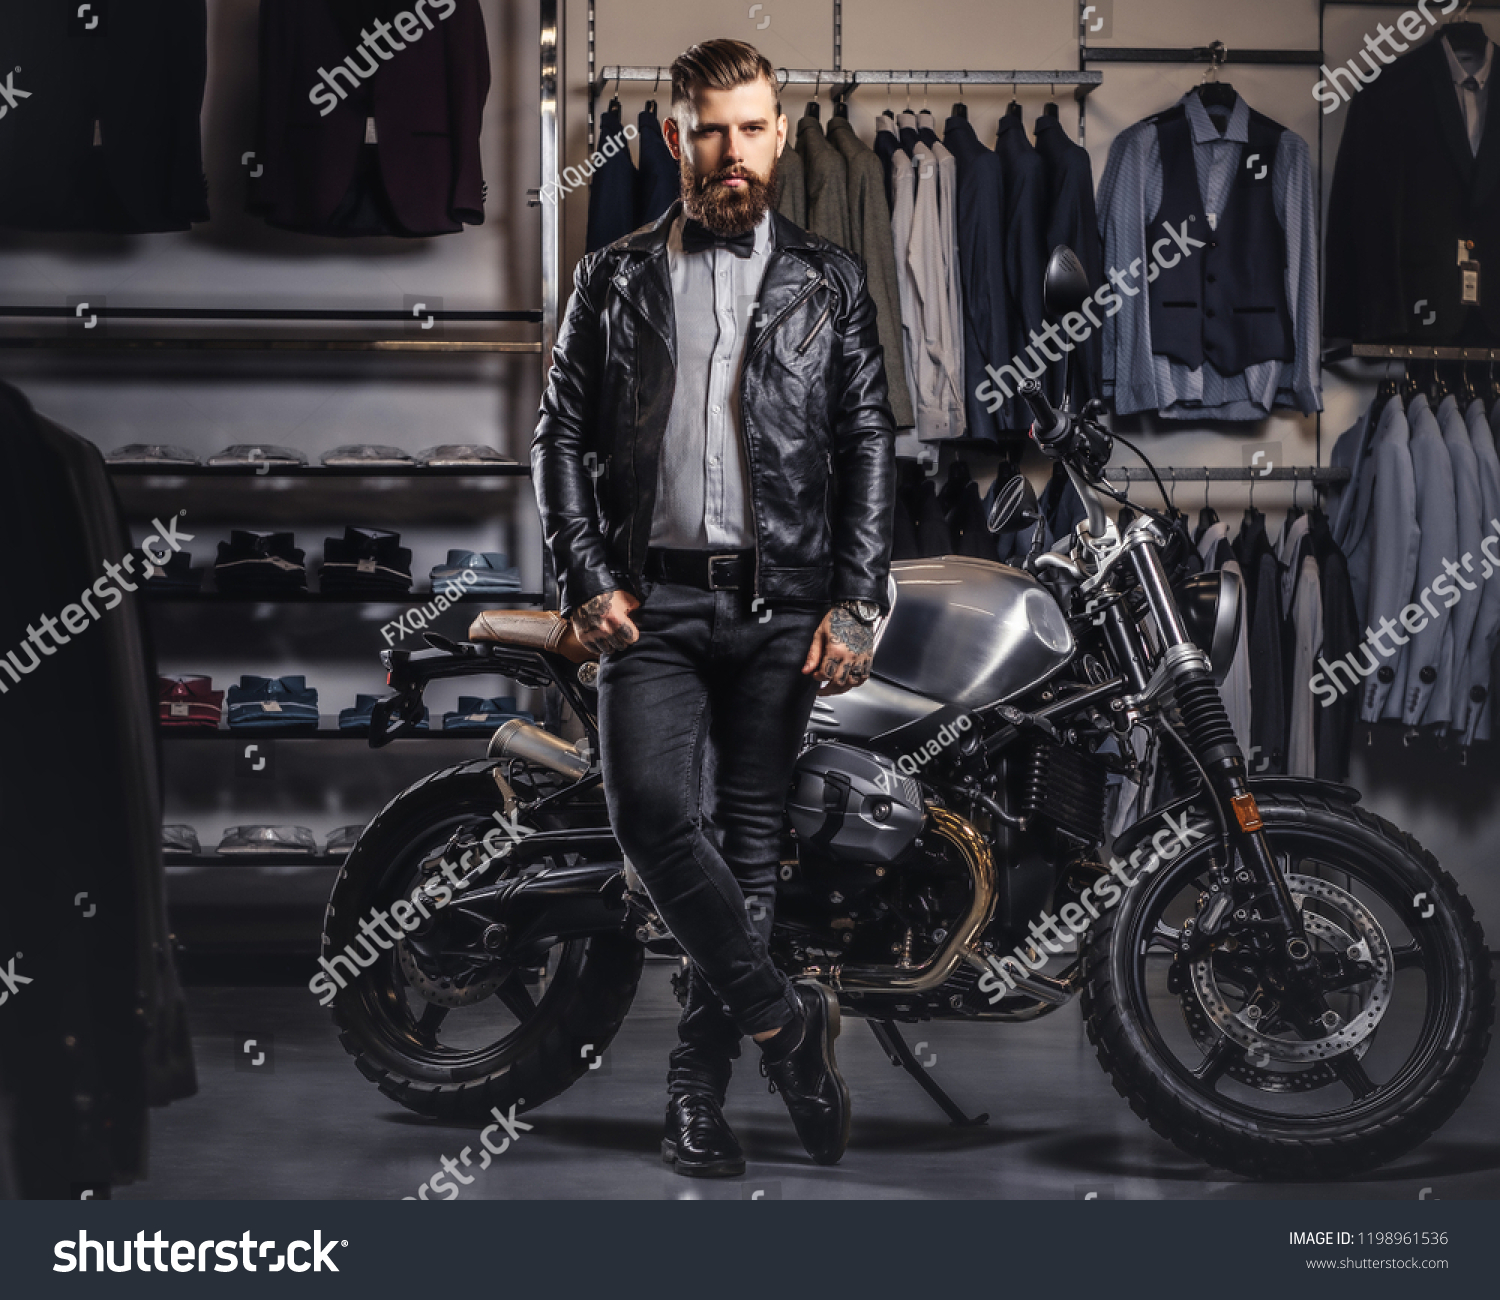 Stylish tattooed bearded man with dressed in black leather jacket and bow tie posing near retro sports motorbike at men's clothing store. #1198961536